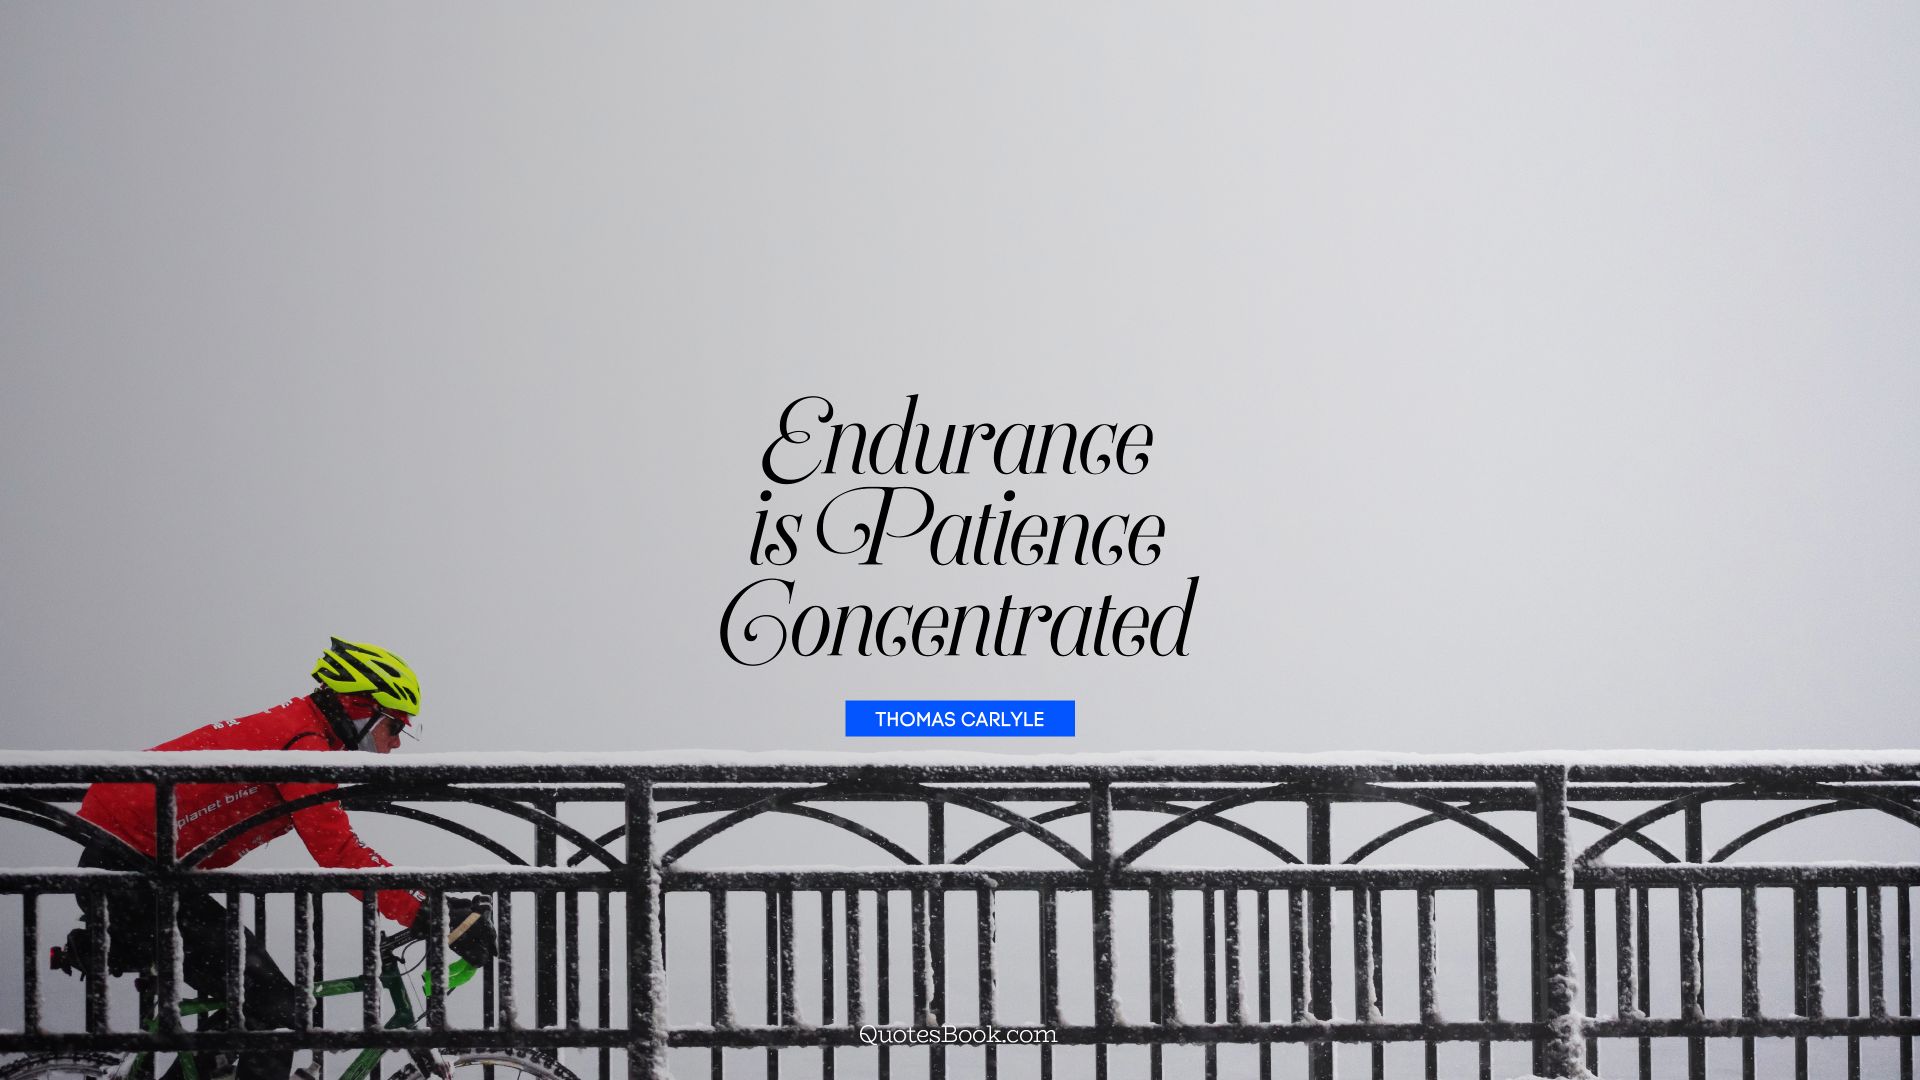 Endurance is patience concentrated. - Quote by Thomas Carlyle